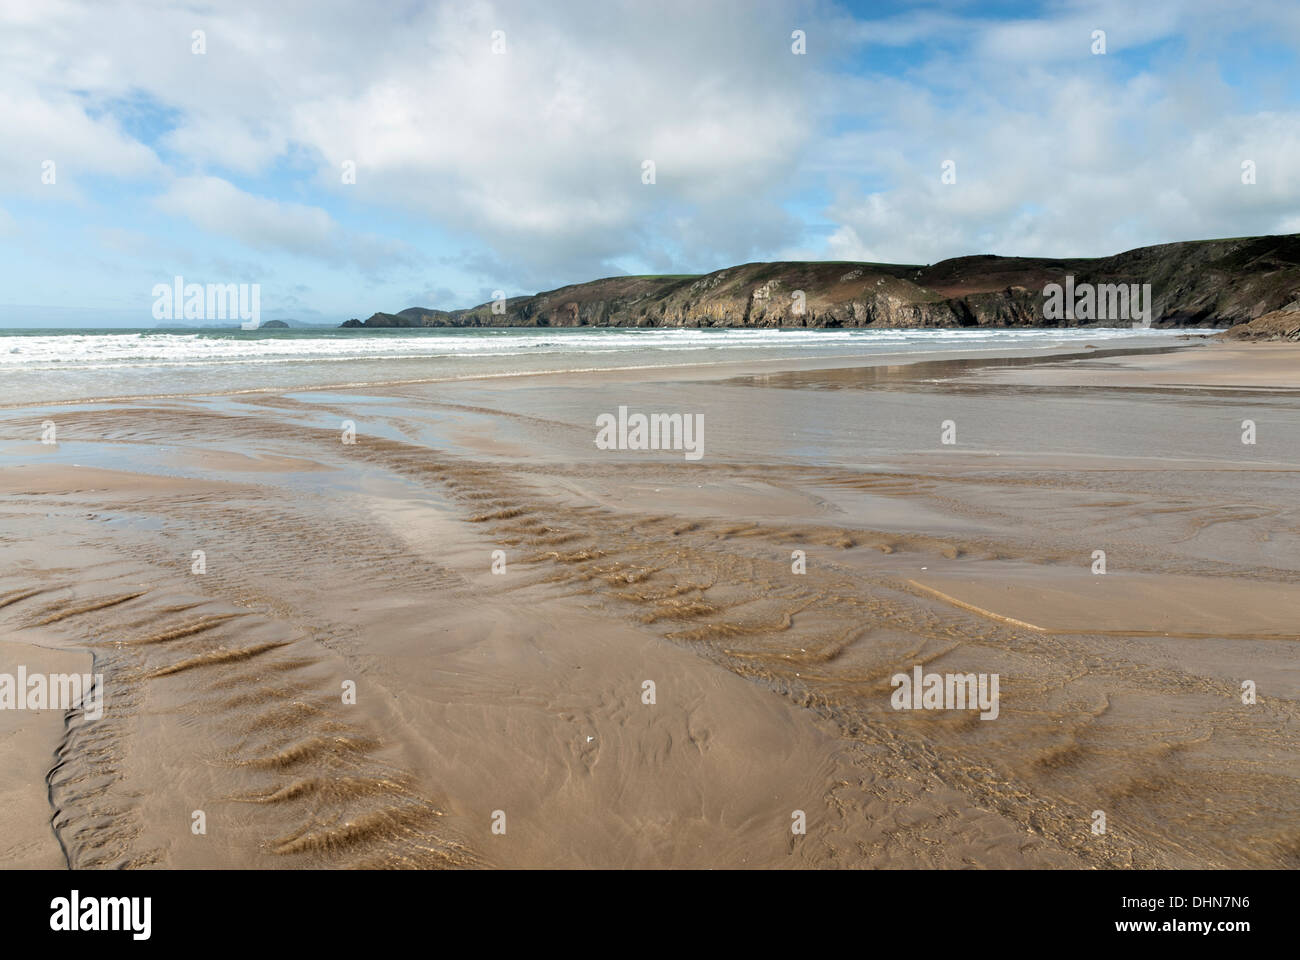 Deserted Newgale Sands Beach with freshwater stream water flowing to the sea and with cliffs and surf in the background. Stock Photo